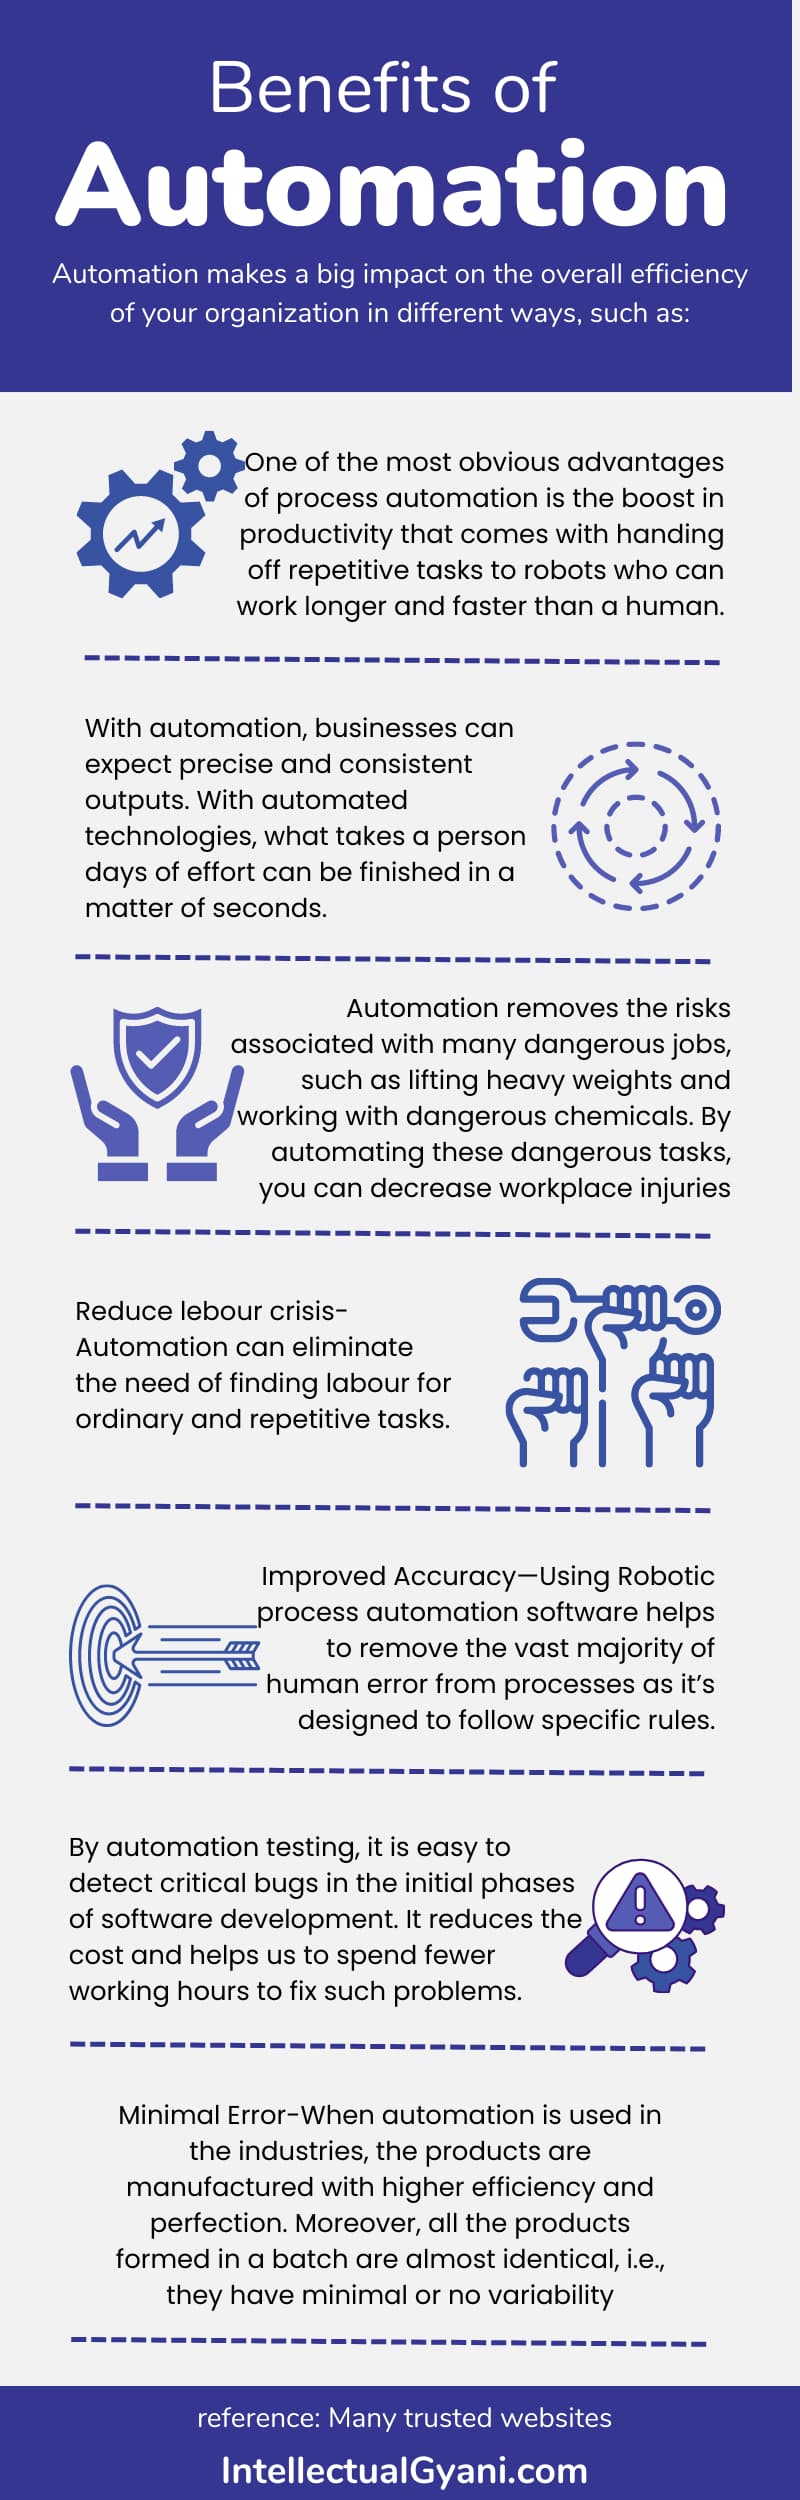 advantages of automation infographic